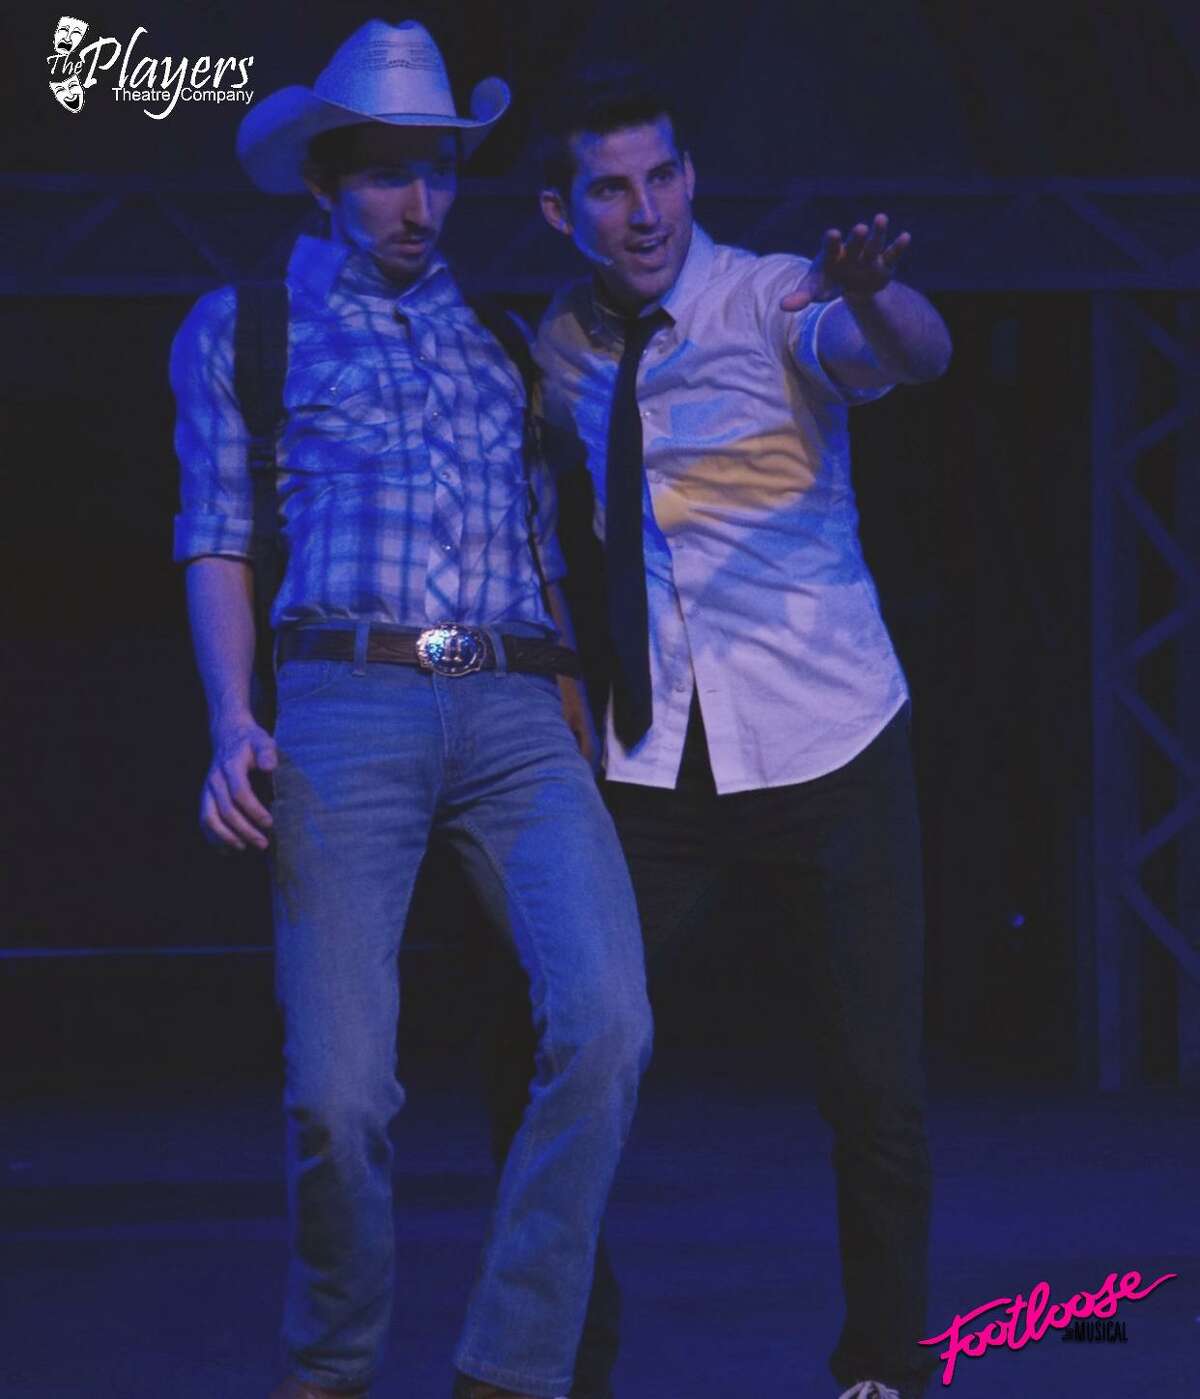 Willard (Kyle Clevenger) and Ren (Carson Rapsilver) in The Players Theatre Company's "Footloose" onstage at the Owen Theatre through March 28.